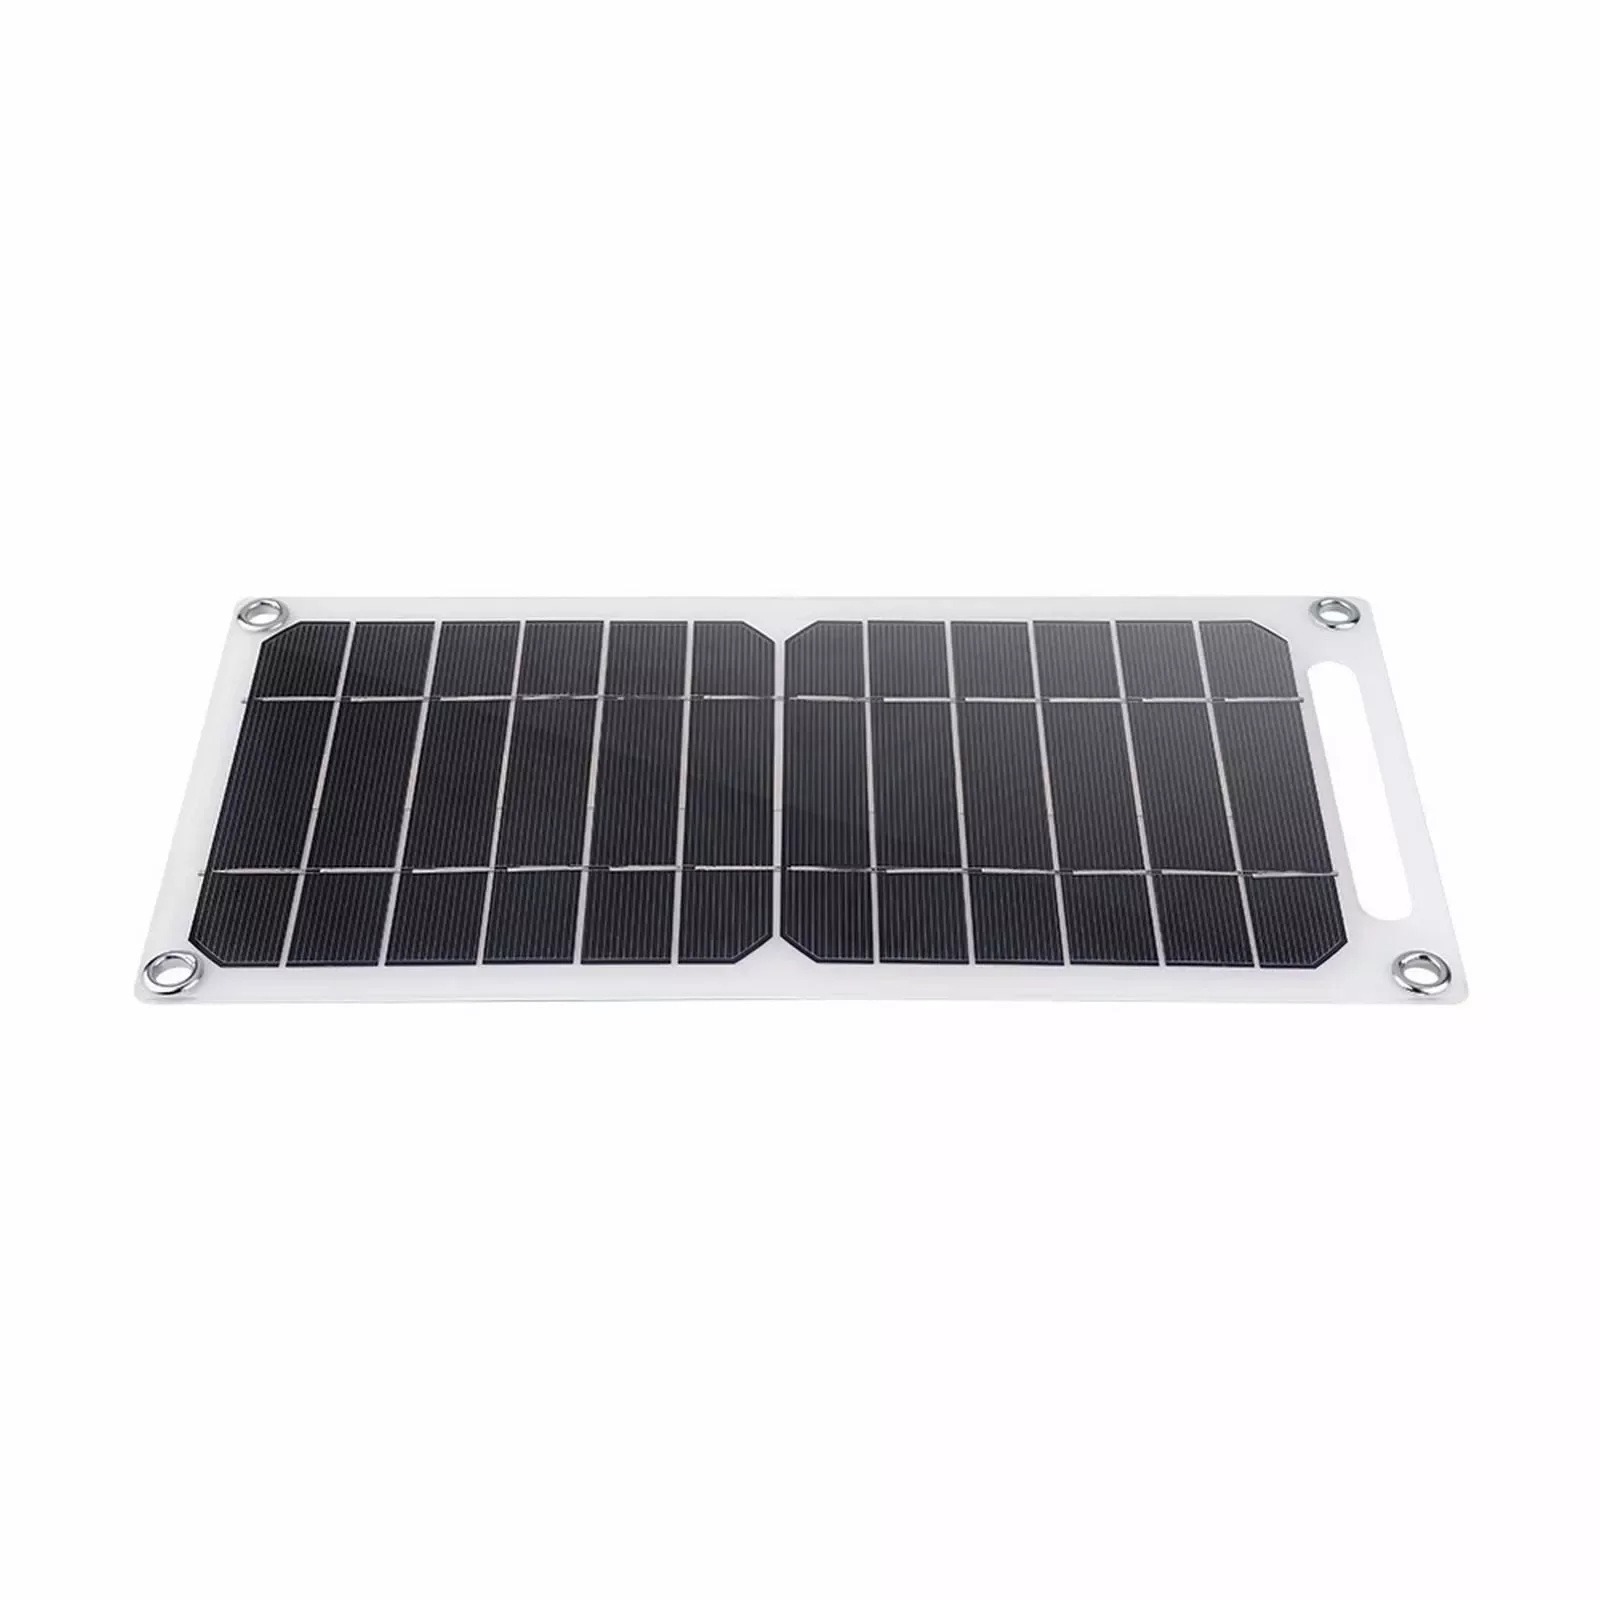 NEW2023 Solar Chargers for Laptops 6W Solar Panel 5V Polysilicon Dual USB Flexible Portable Outdoor Solar Wireless Magnetic Powe